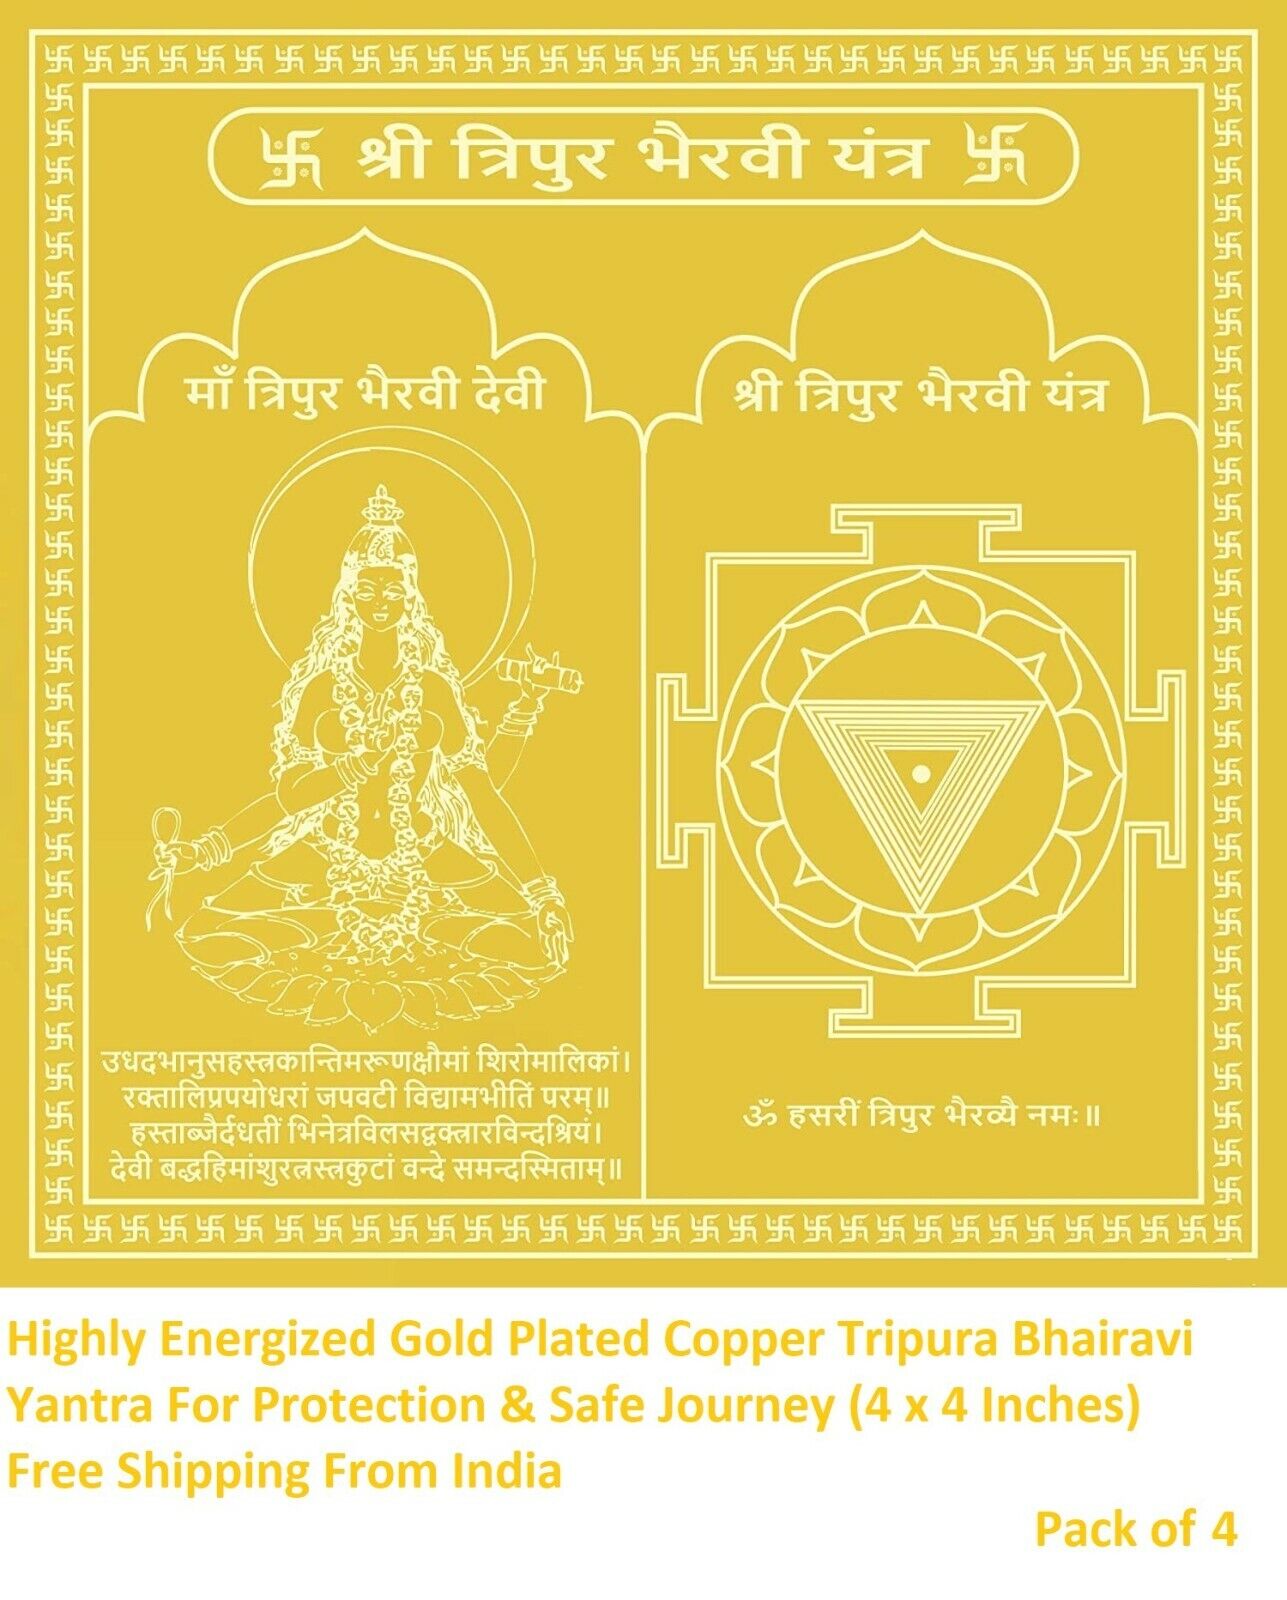 4 x Energized Gold Plated Copper Tripura Bhairavi Yantra For Journey Protection